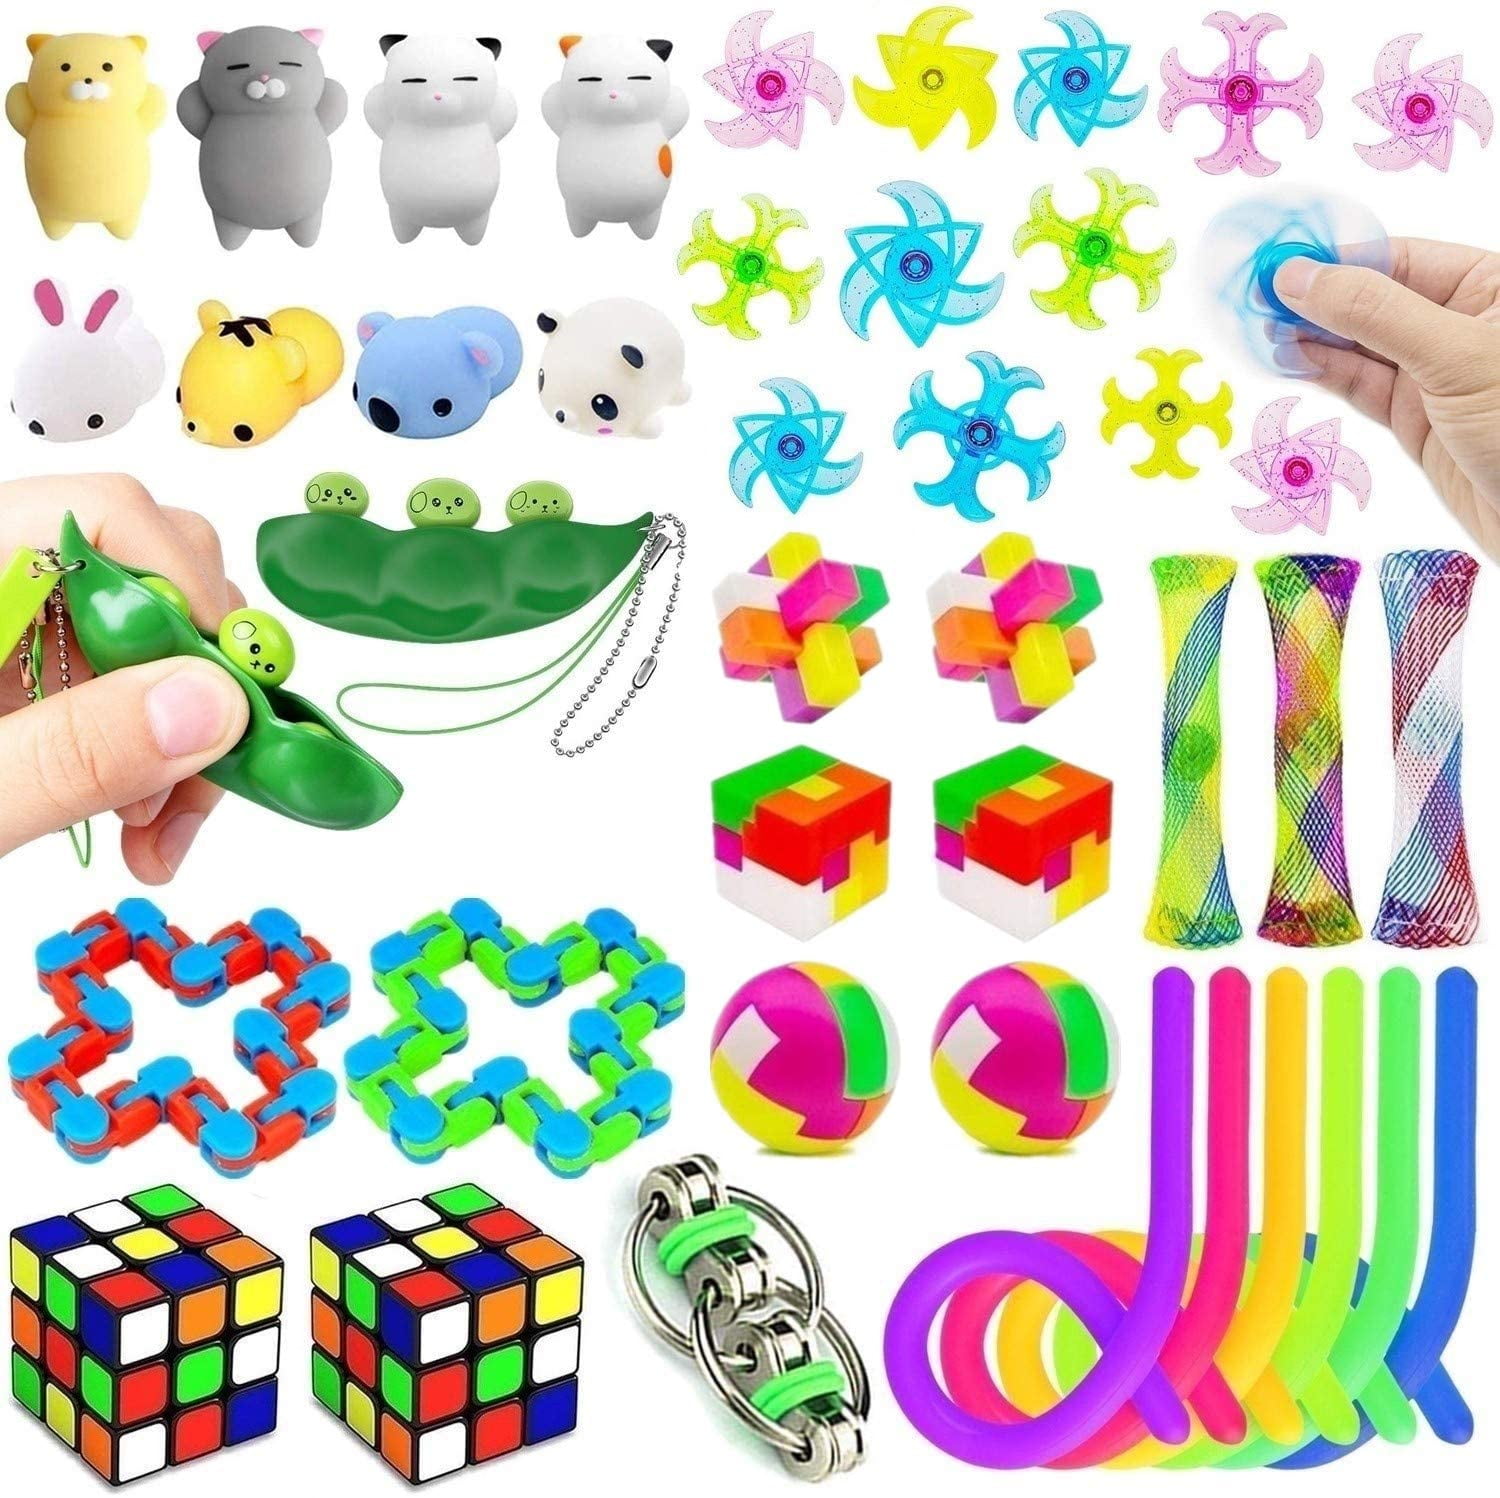 Mini Magic Cube Wacky Tracks Toy For Birthday Party,Classroom Rewards,Carnival Prizes Party Assortment Bundle Goodie Bag Fillers Mochi Squishies Party Favor Pinata Toy For Kids Stretchy String 